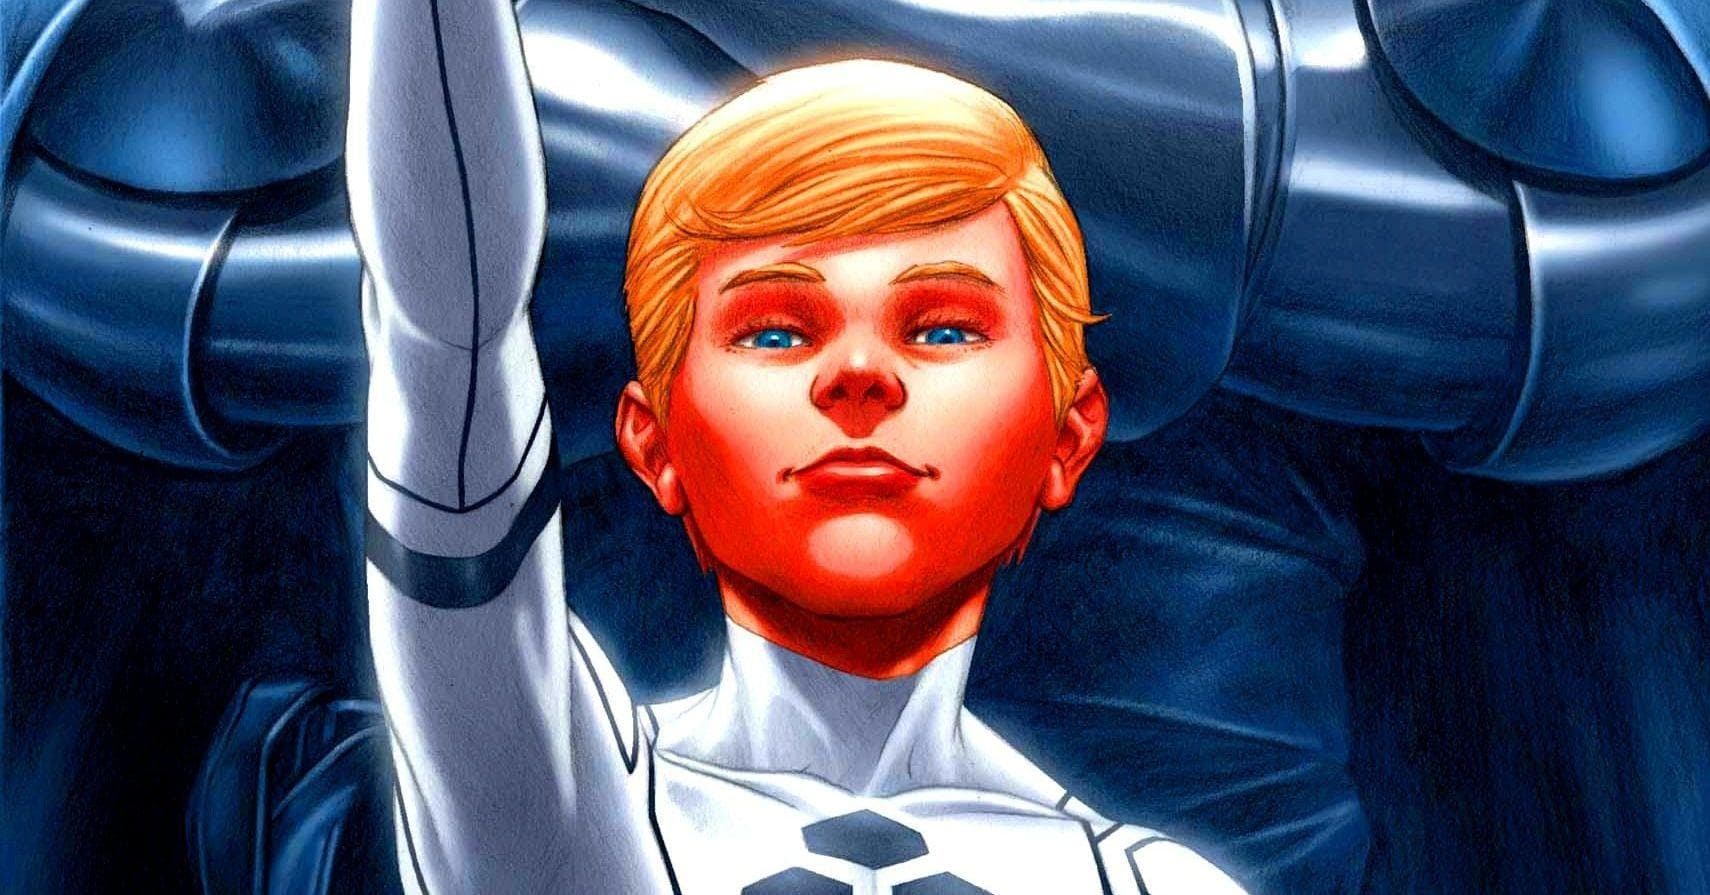 Franklin Richards Is The Most Overpowered Superhero In The Marvel Universe